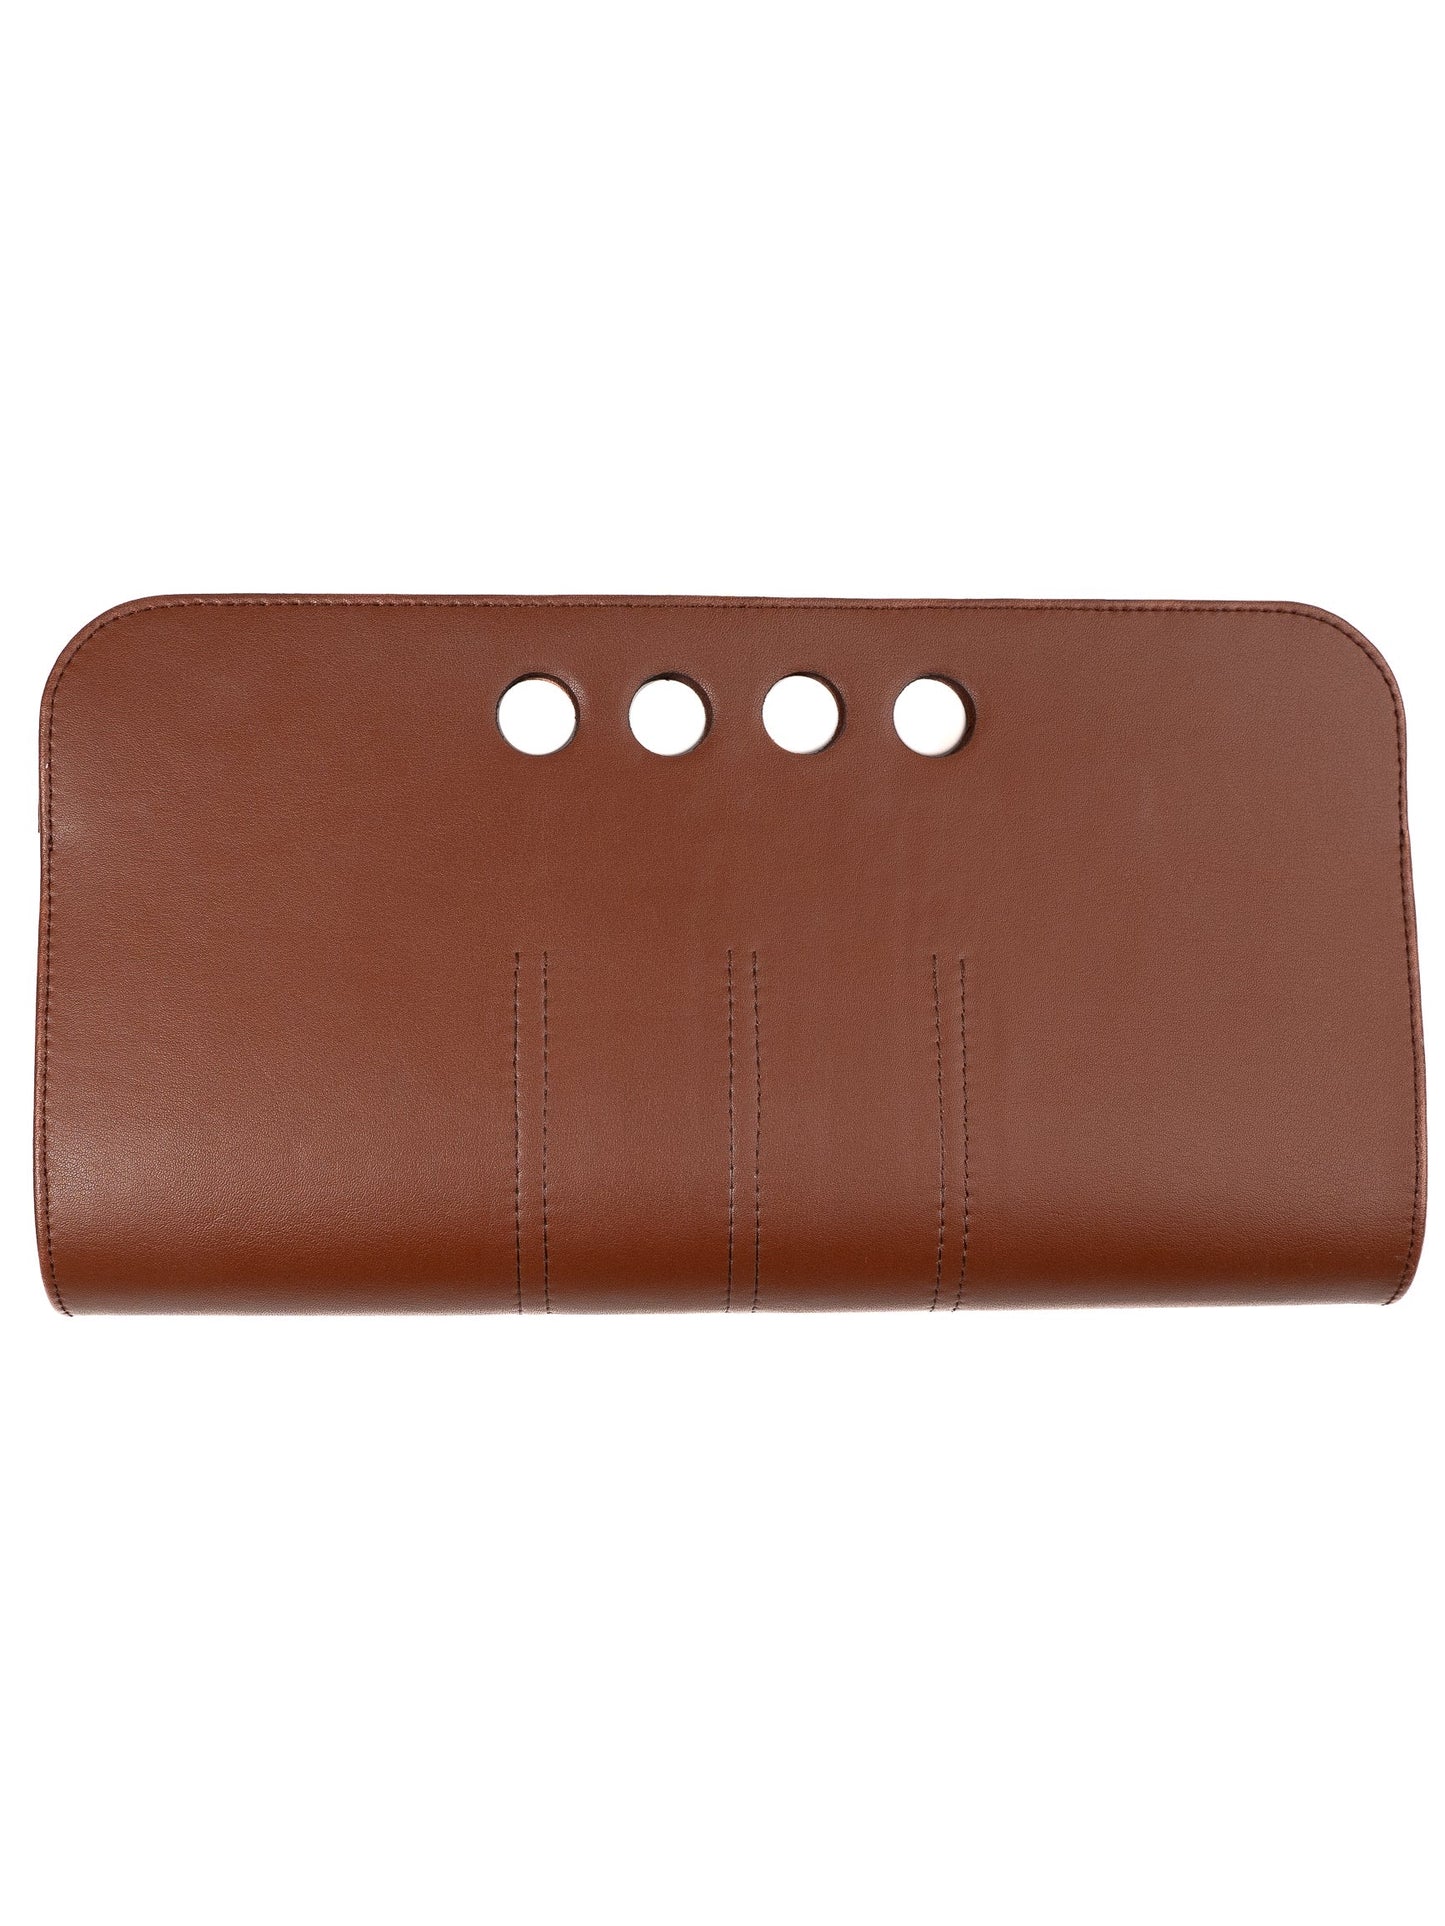 Chic Vegan Leather Clutch - Clay/Small (limited edition, Agave)